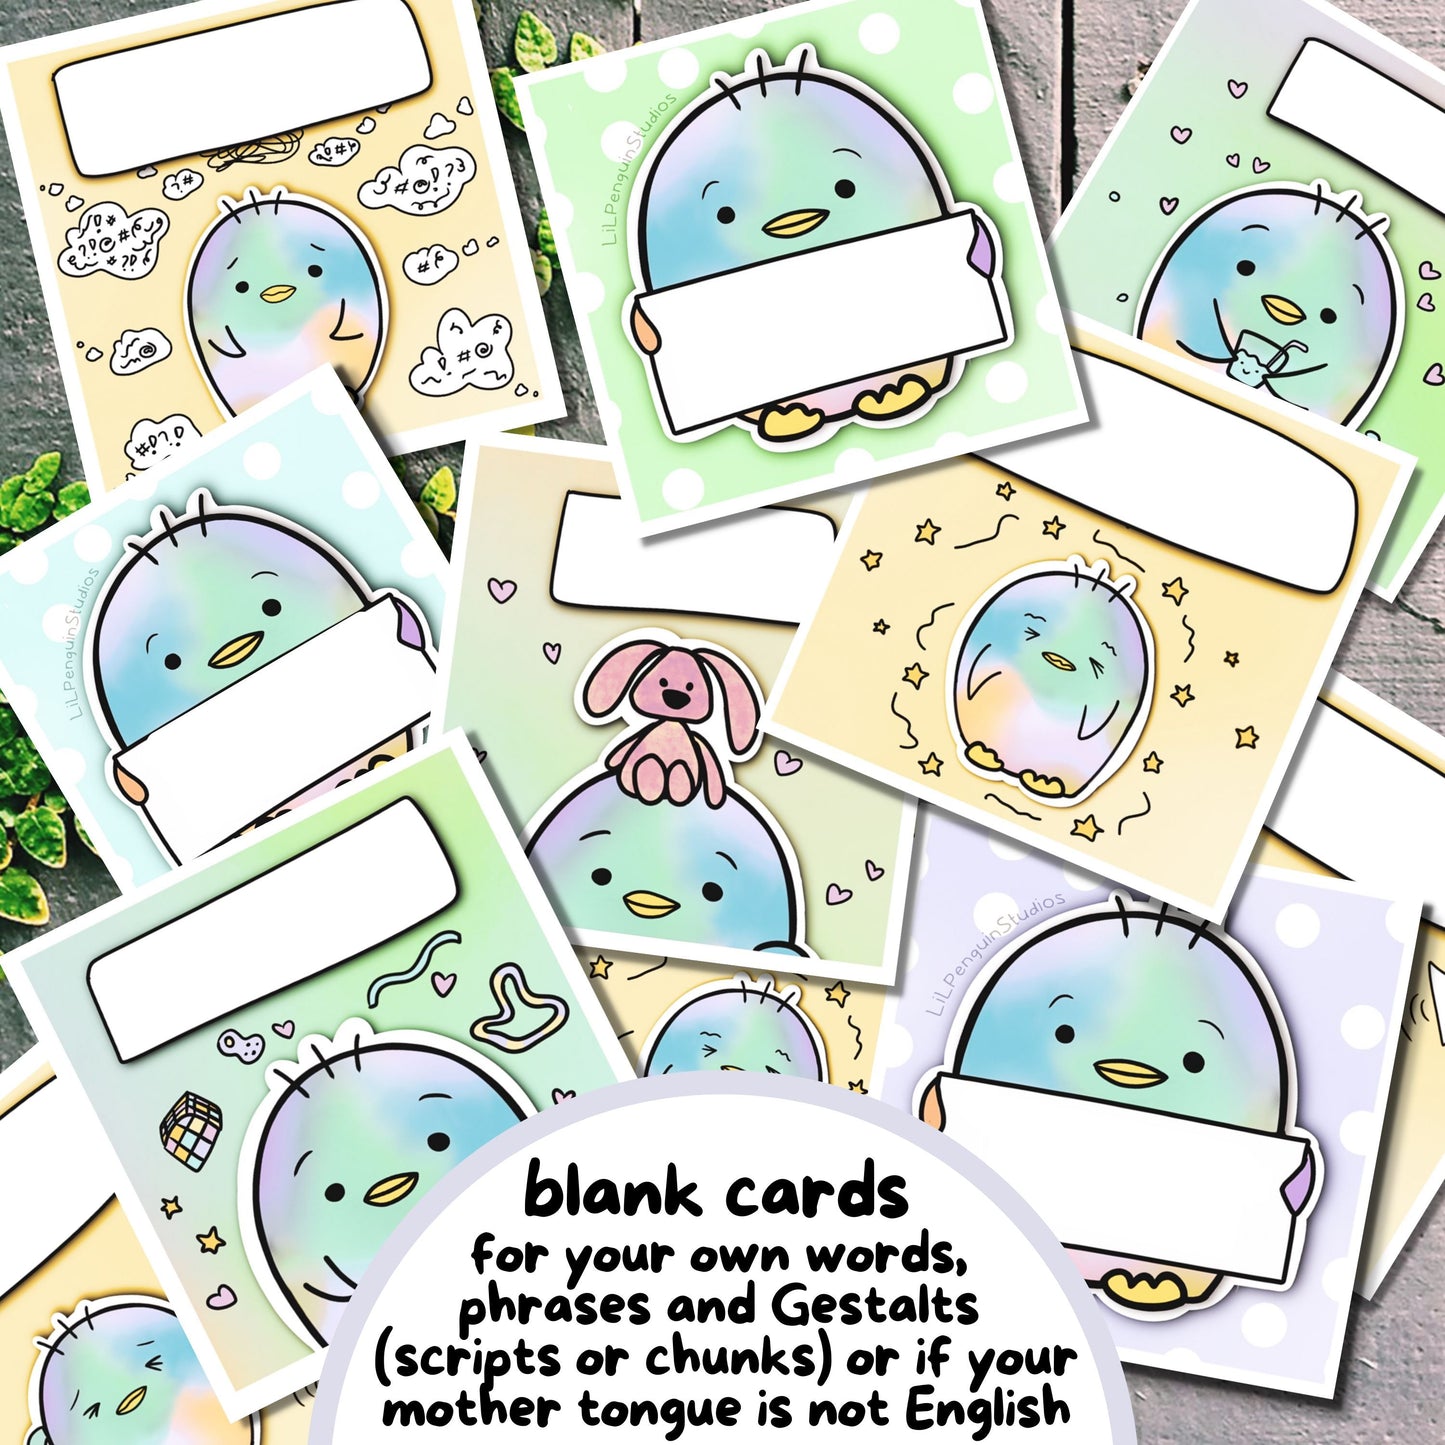 Blank communication cards for your own words, phrases and Gestalts (scripts or chunks), or if your mother tongue is not English (non speaking/ non verbal communication)Hand-Drawn Penguin-Themed Communication Cards (Shutdown and Meltdown Triggers and Needs)